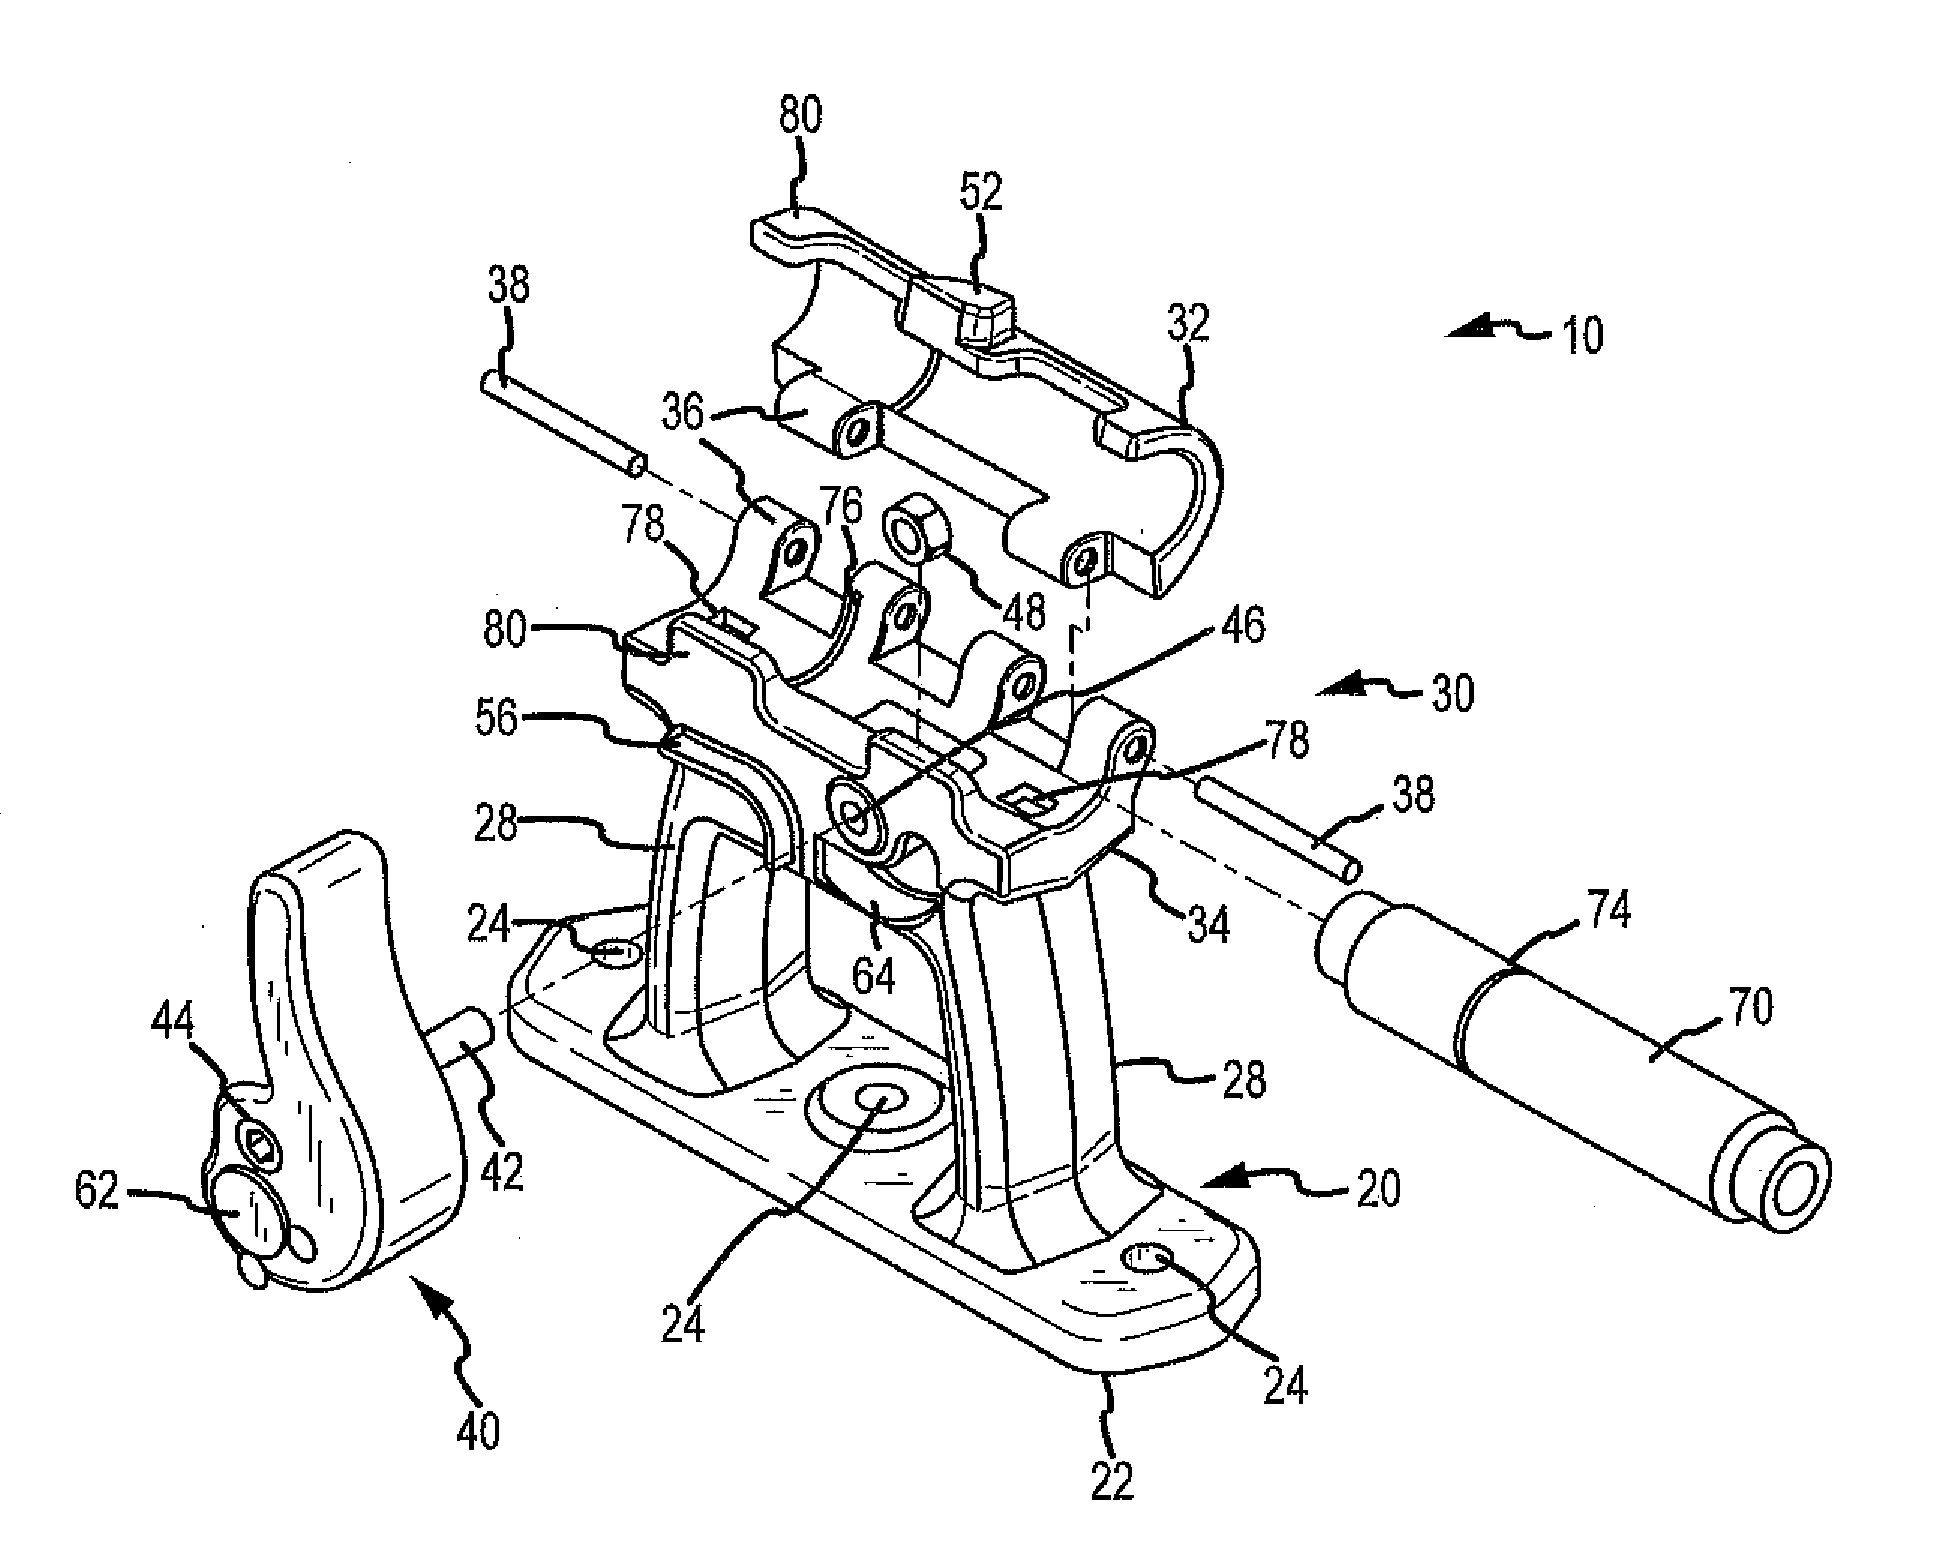 Carrier and Adaptor for Transporting a Bicycle on a Fork Mount Holding/Transporting System